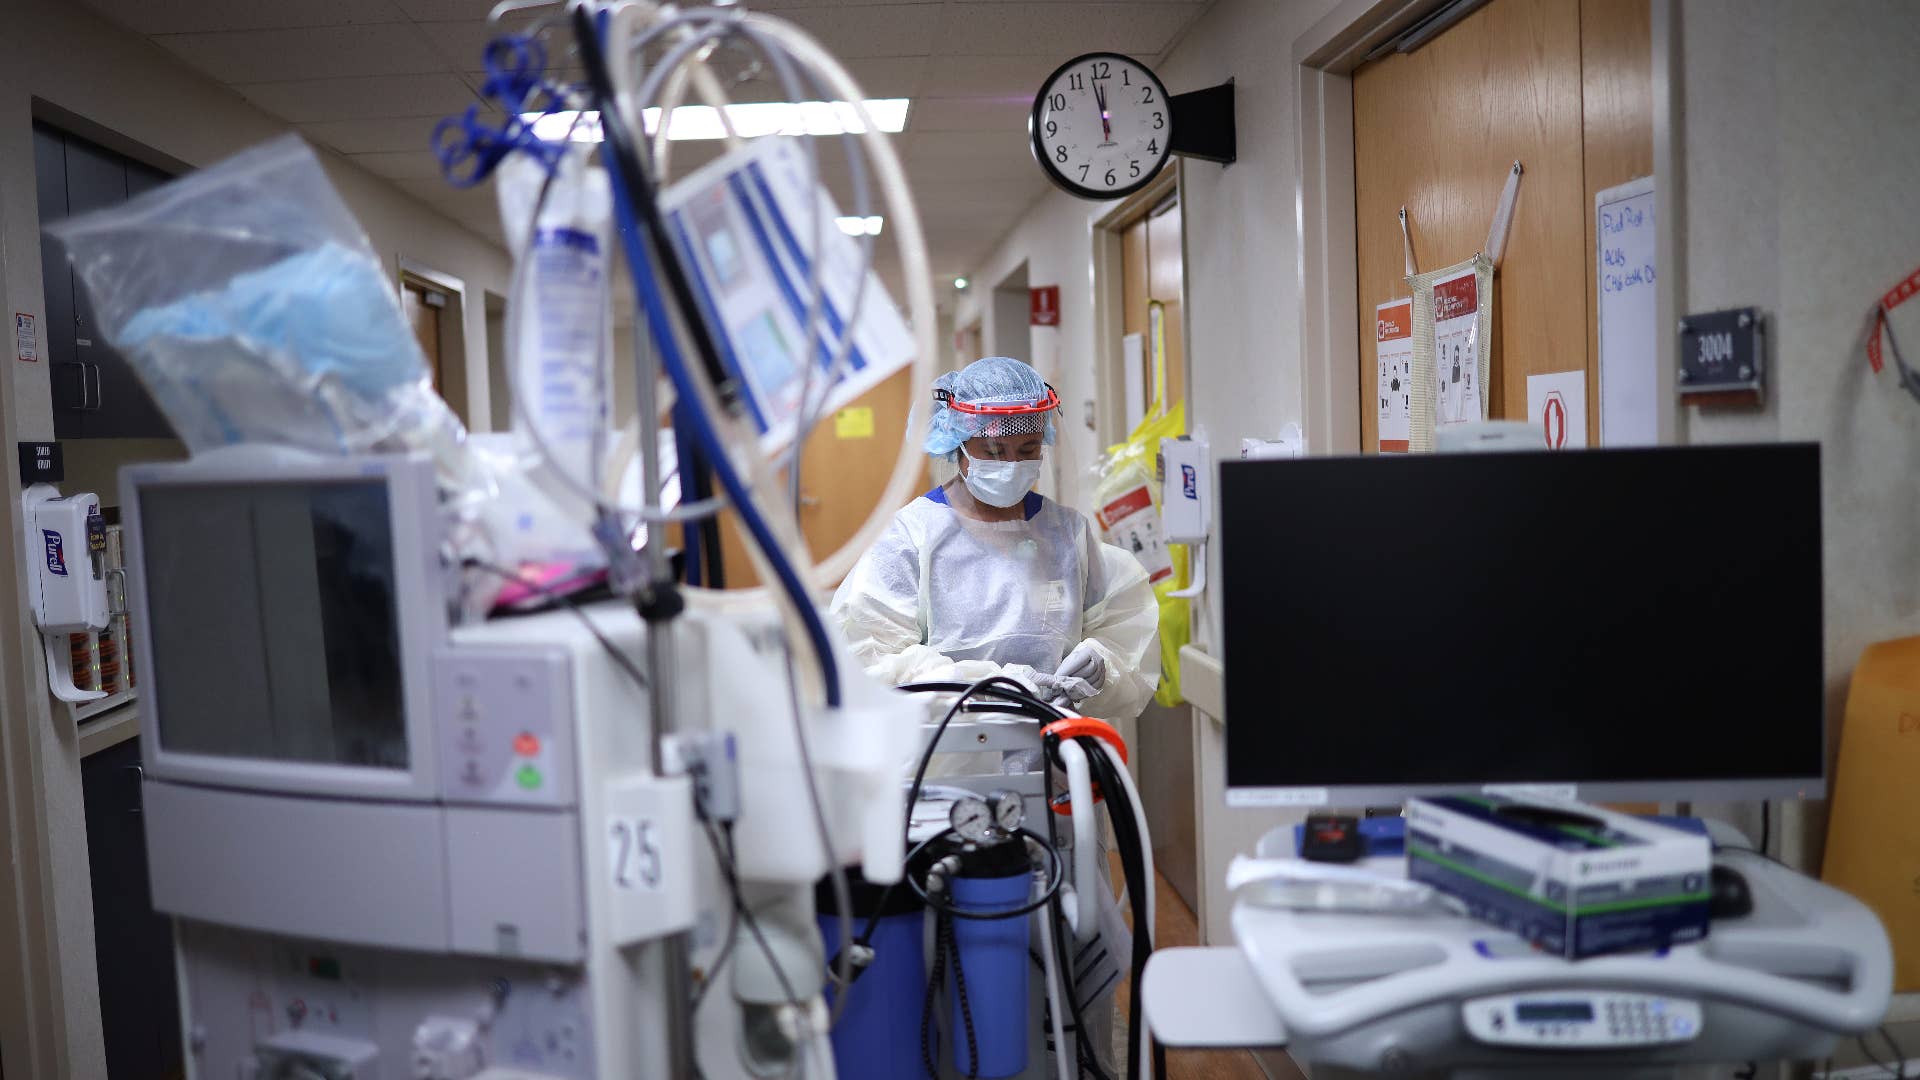 A member of the dialysis prepares to treat a patient with coronavirus in the intensive care unit.